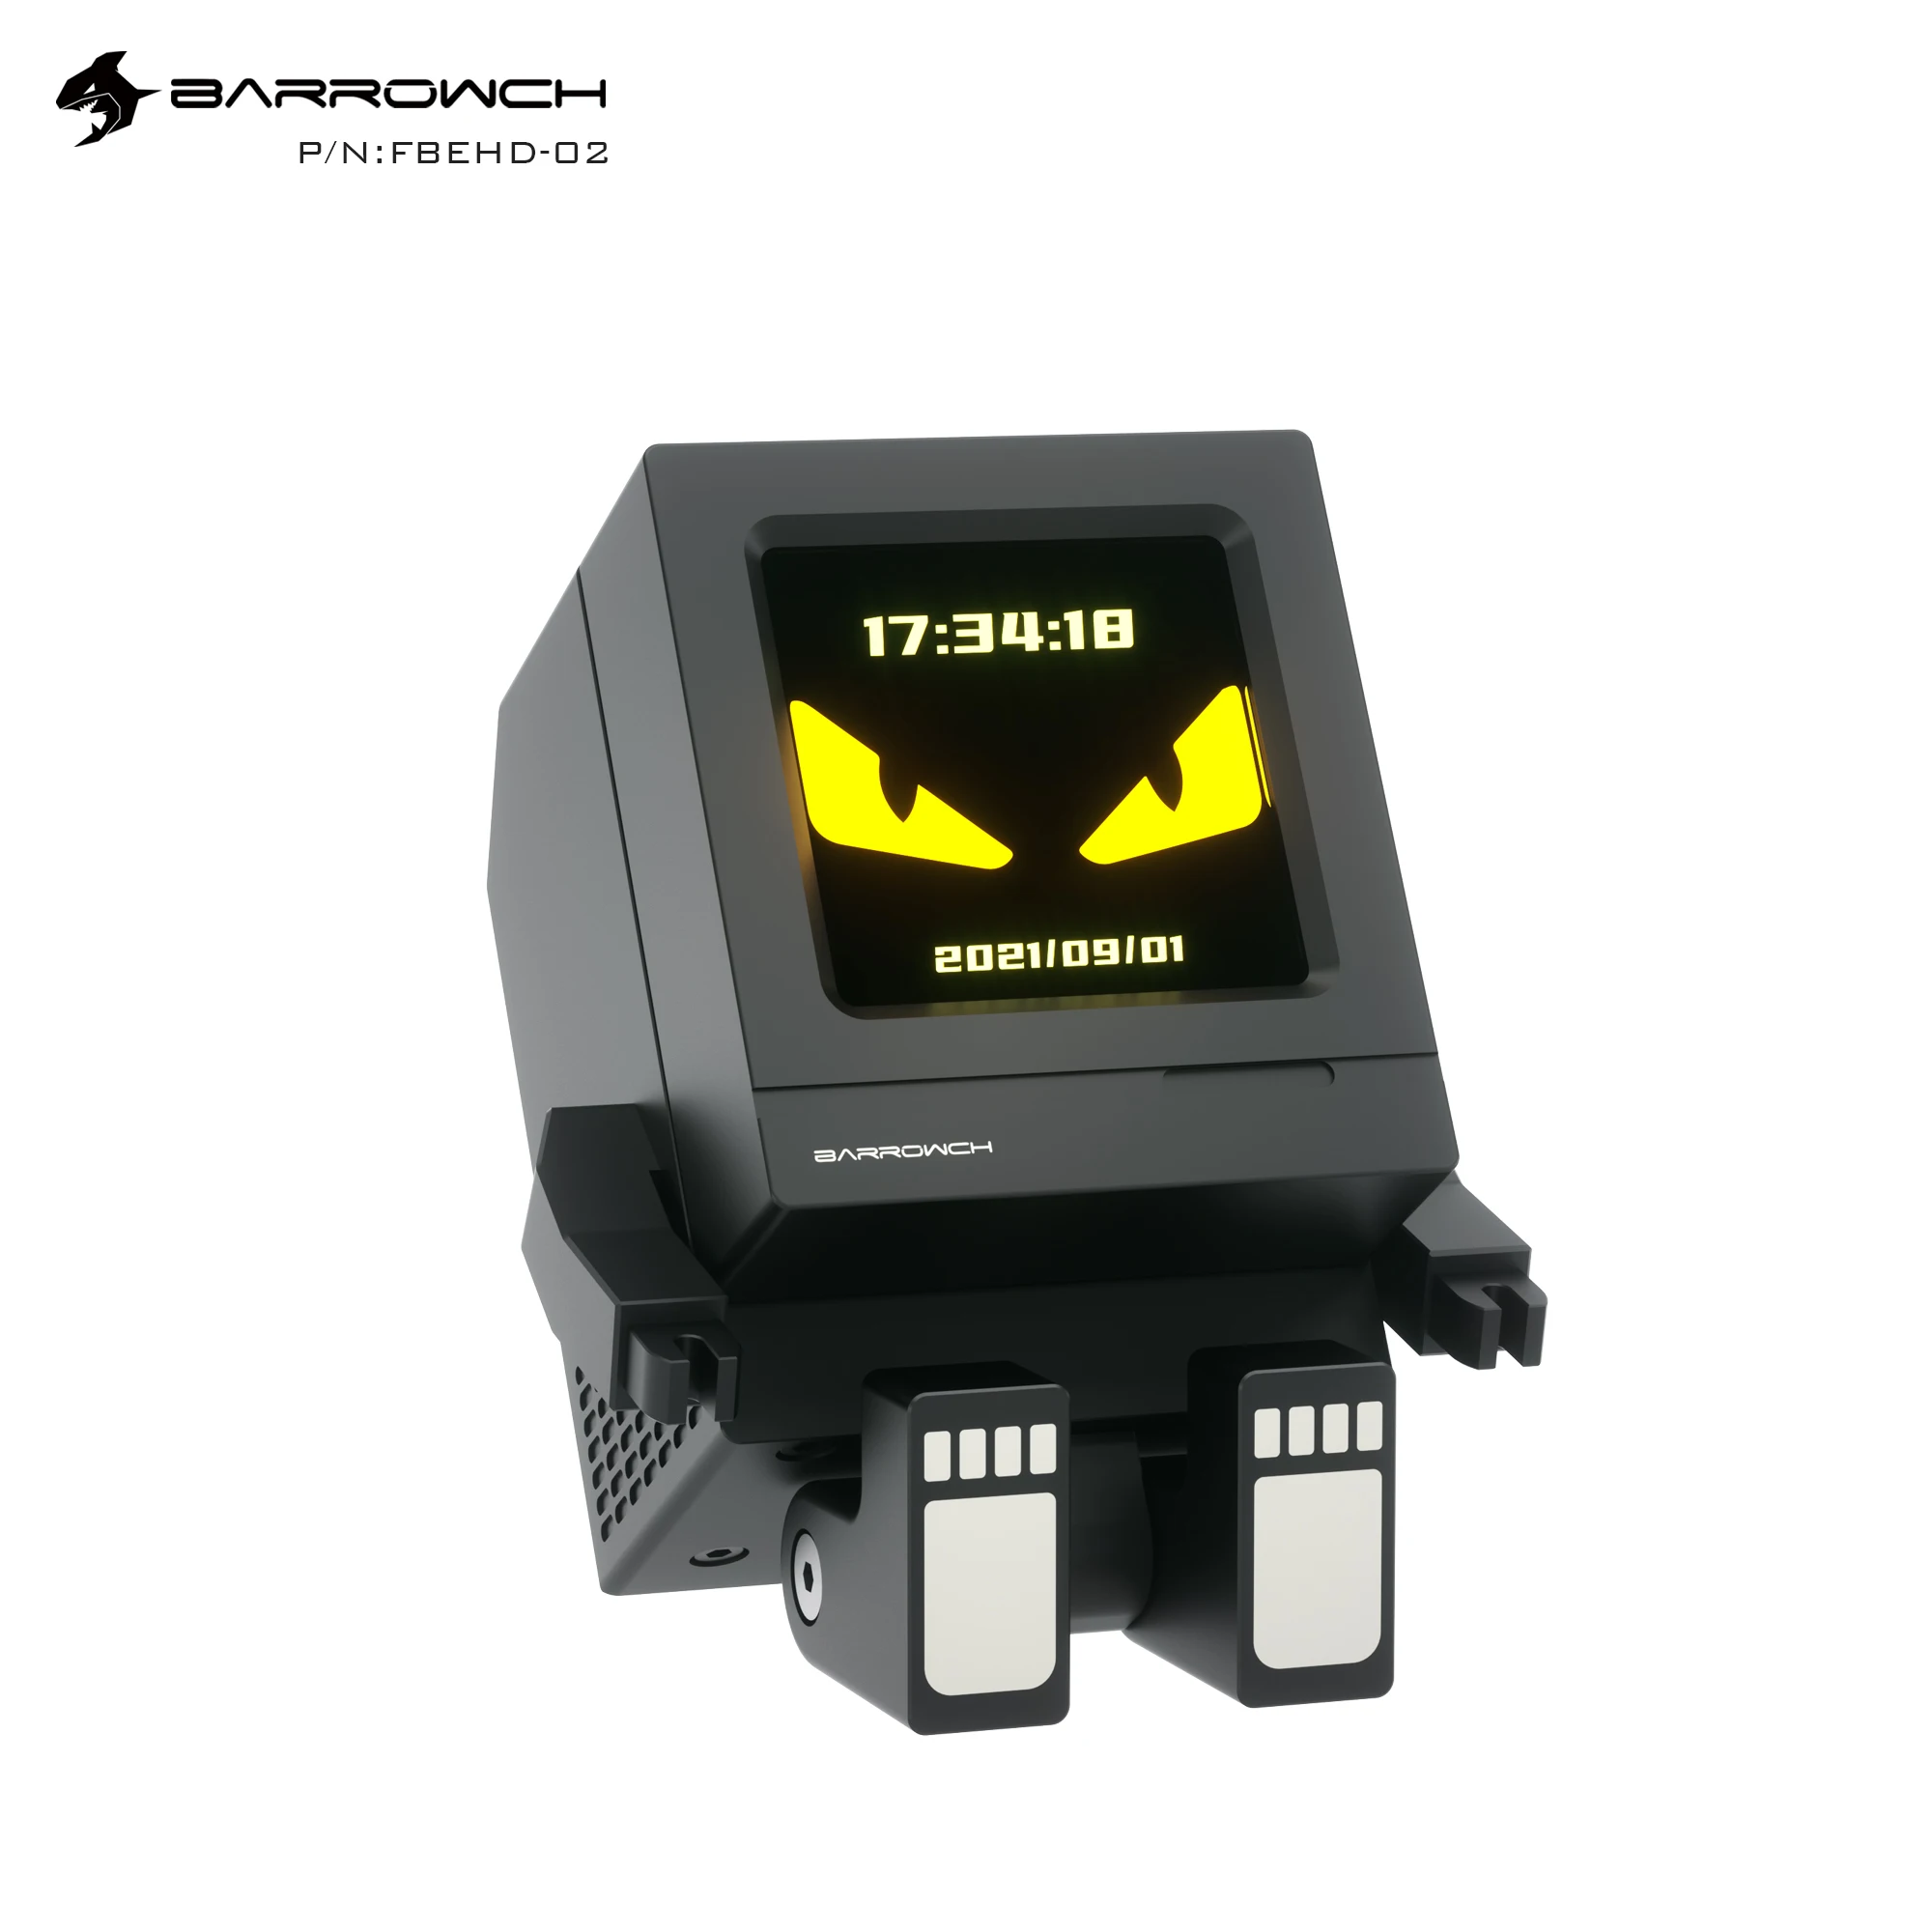 

Barrowch FBEHD-02 Limited edition Cyclops MINI independent Display 2.9 Inch, For PC CPU Hardware Sync Temperature Monitor